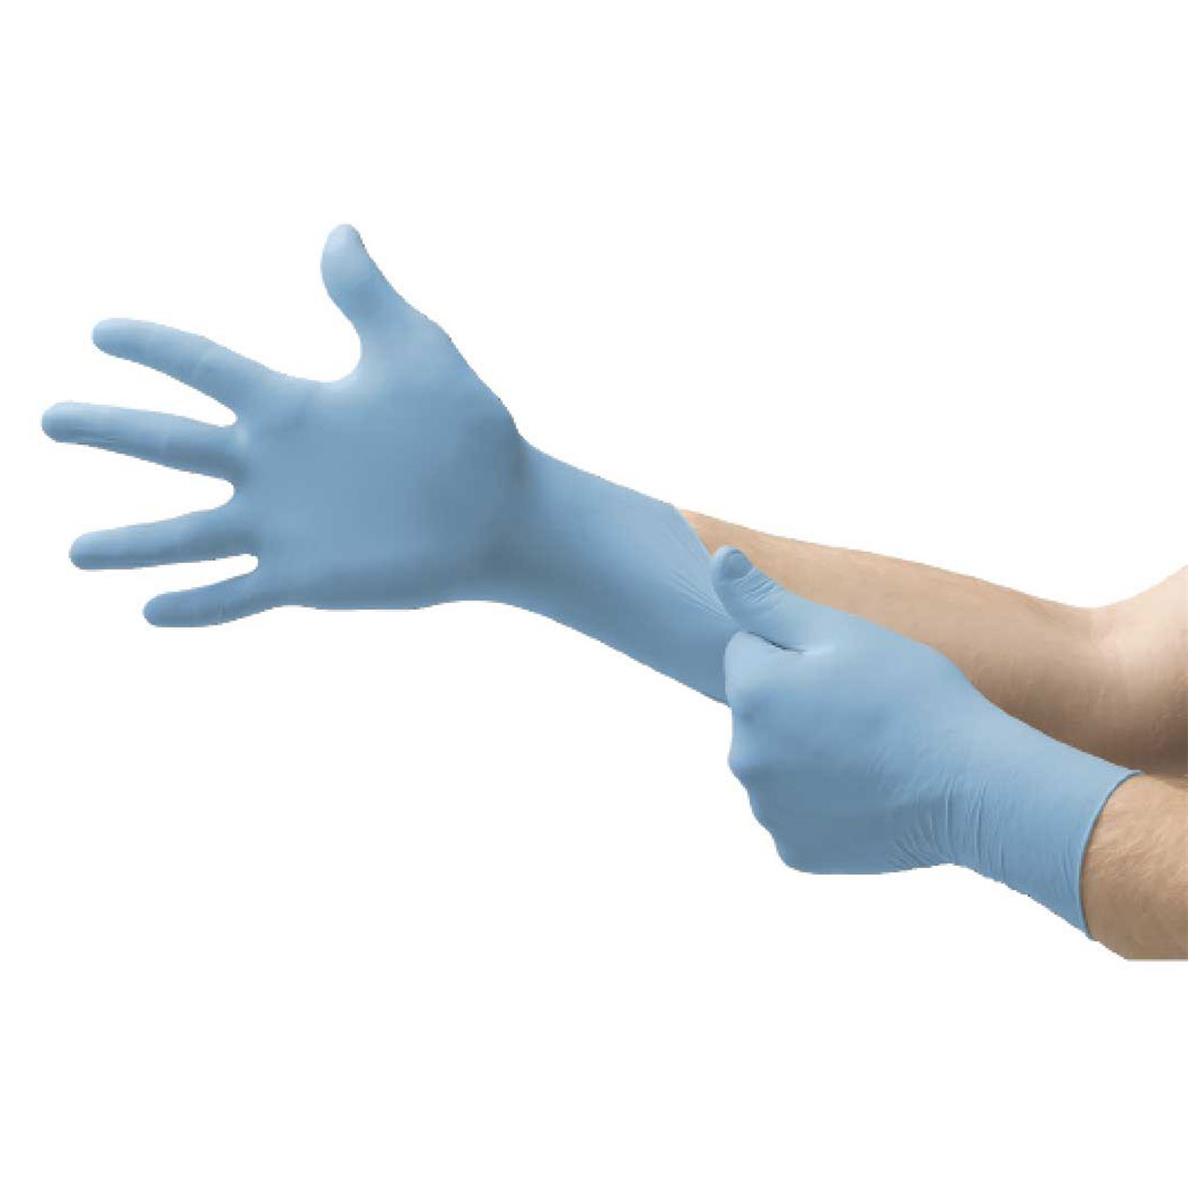 Image of DiVal Microflex Integra N86 Nitrile Disposable Exam Glove